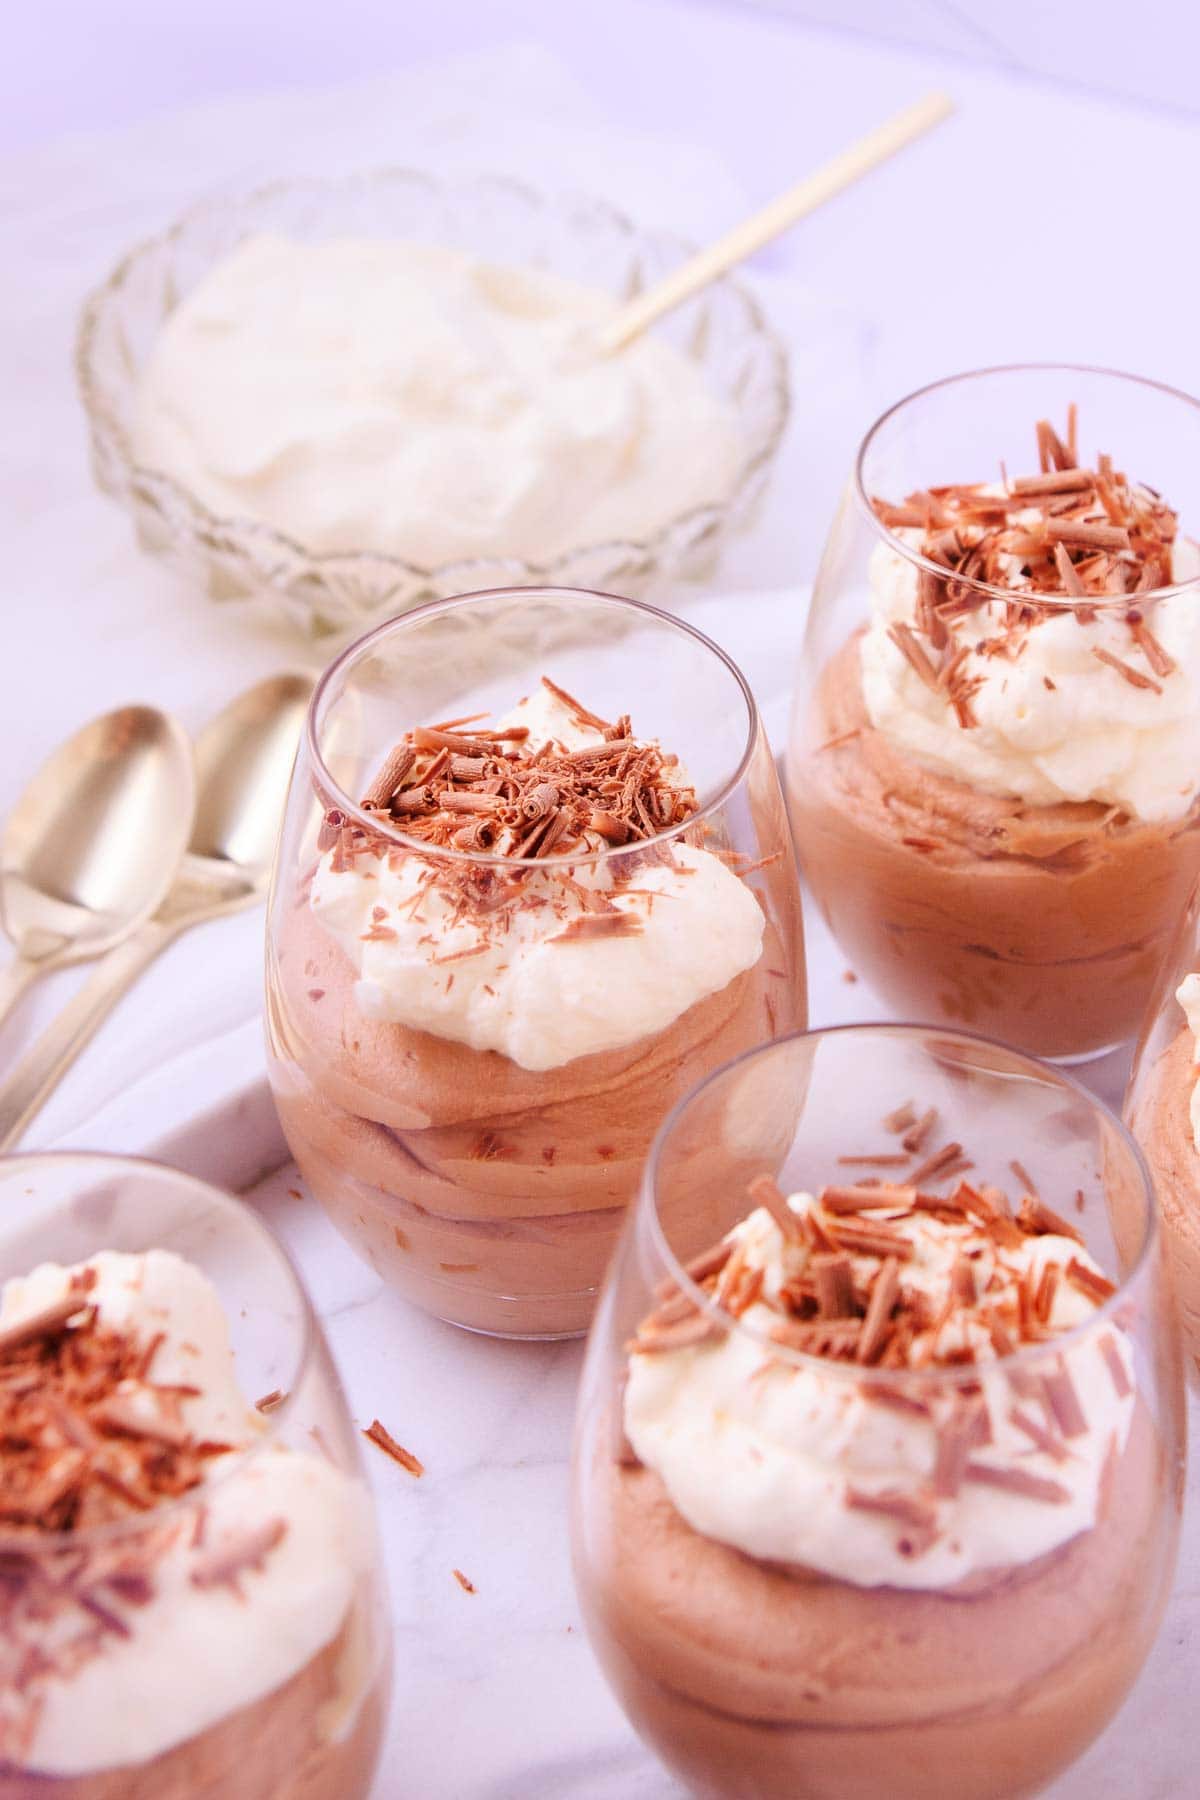 Four glasses of mousse, with a small glass bowl of whipped cream, and gold teaspoons in the background.